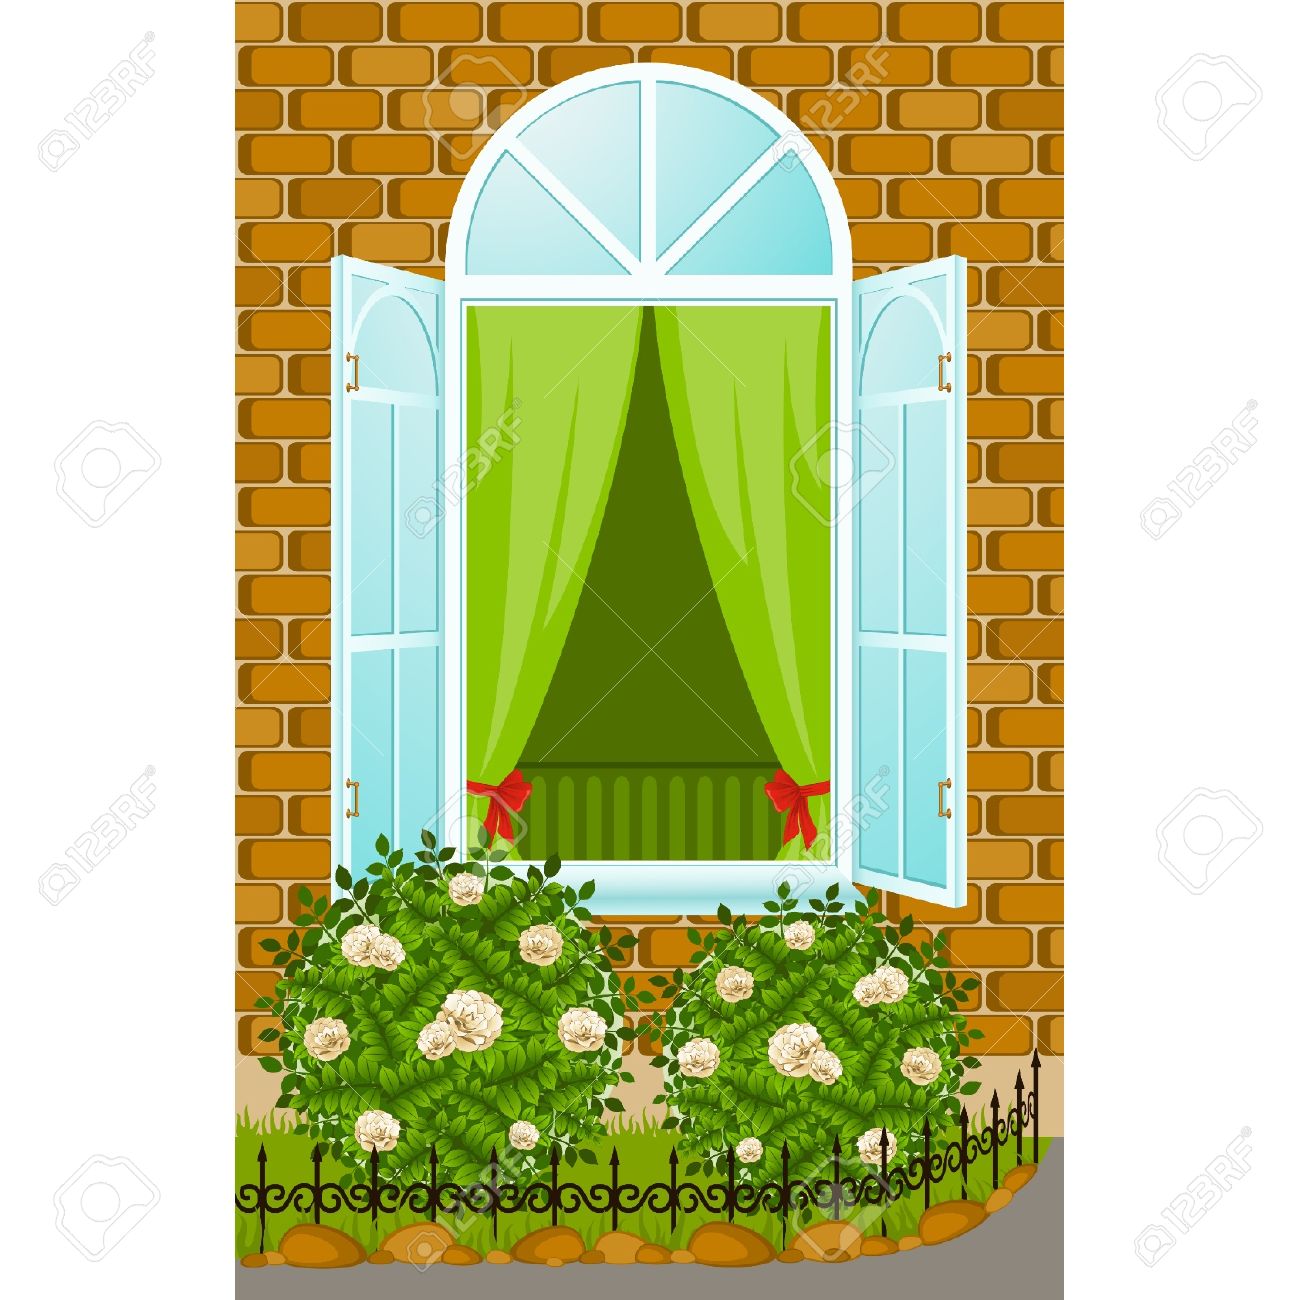 Facade Of House With Open Window And Flowerbed Royalty Free.